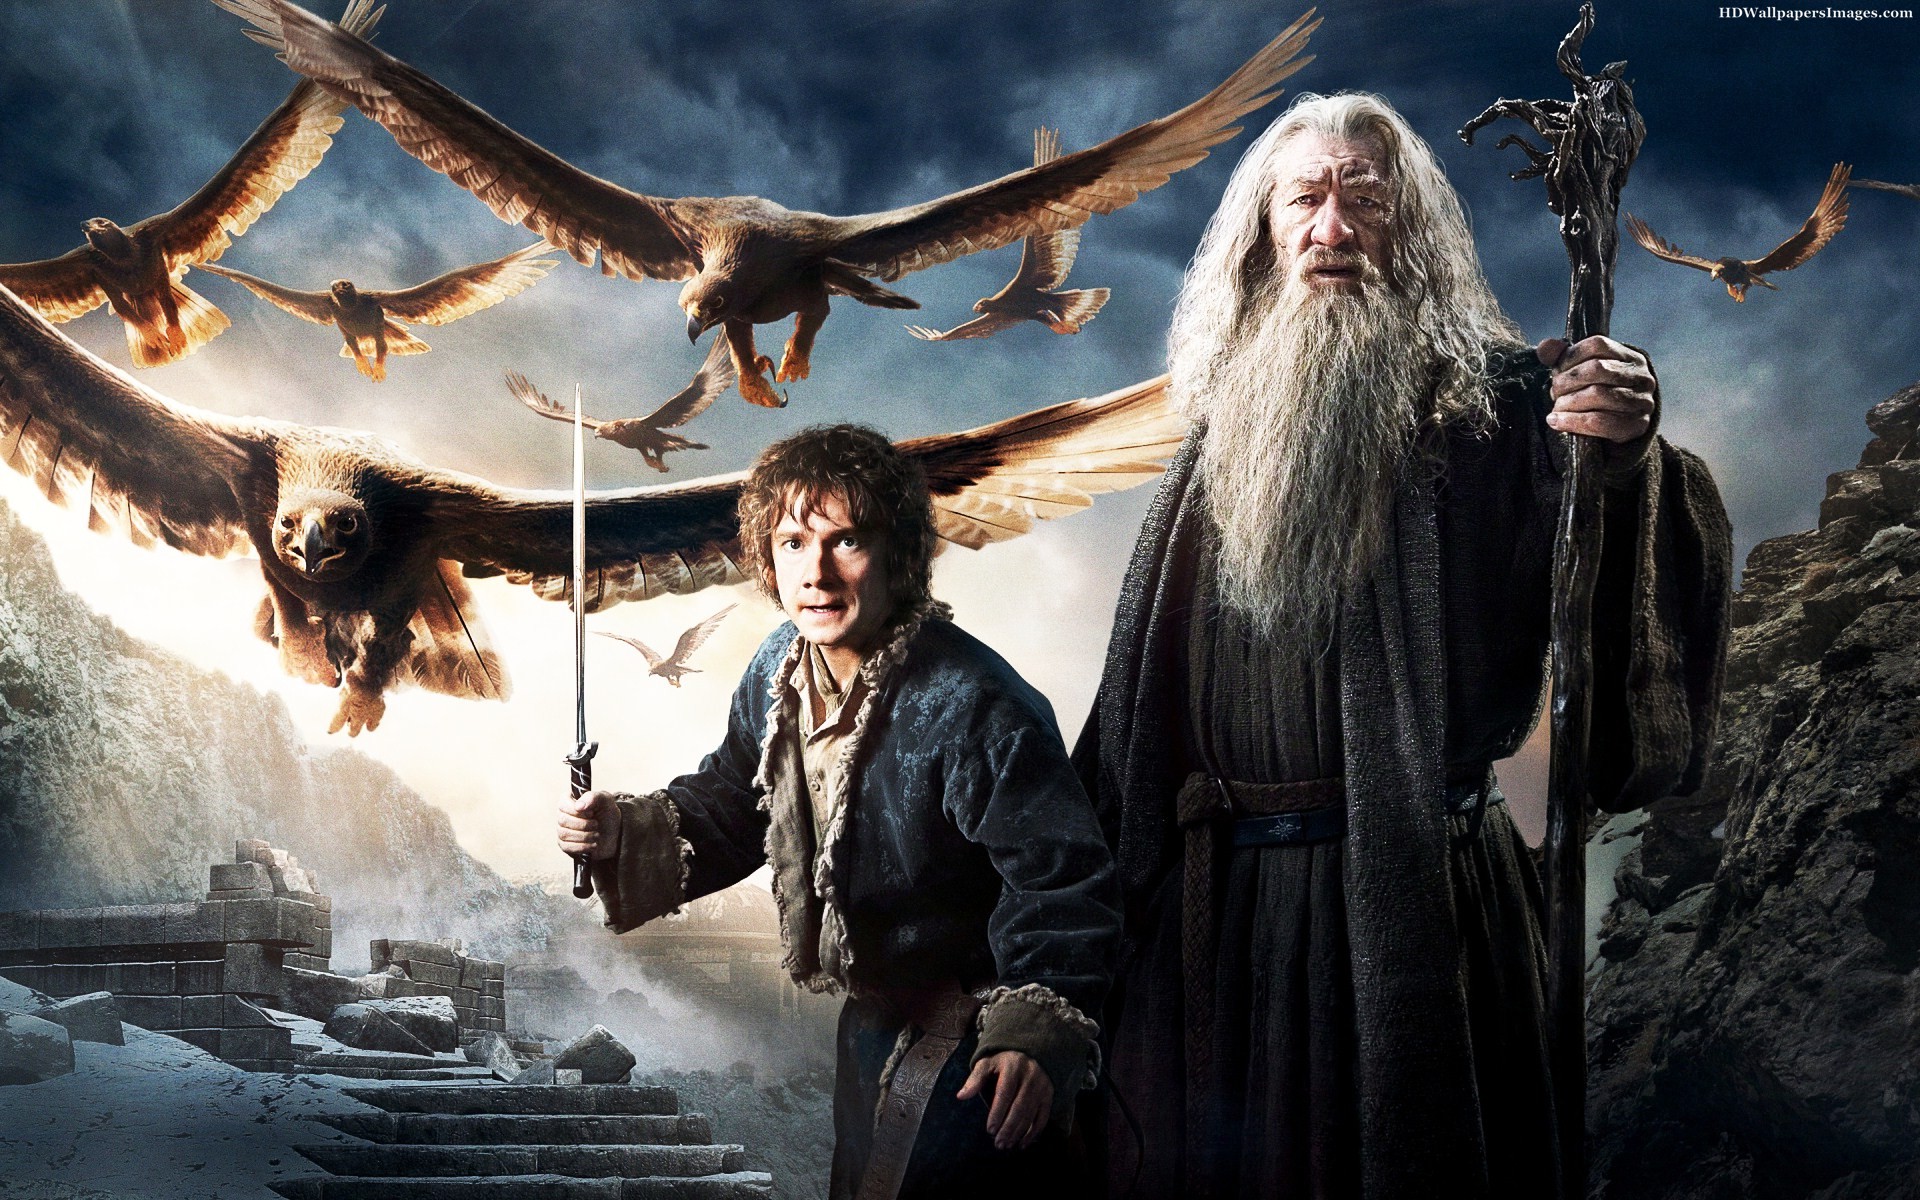 the-hobbit-the-battle-of-the-five-armies-gandalf-and-bilbo-images.jpg